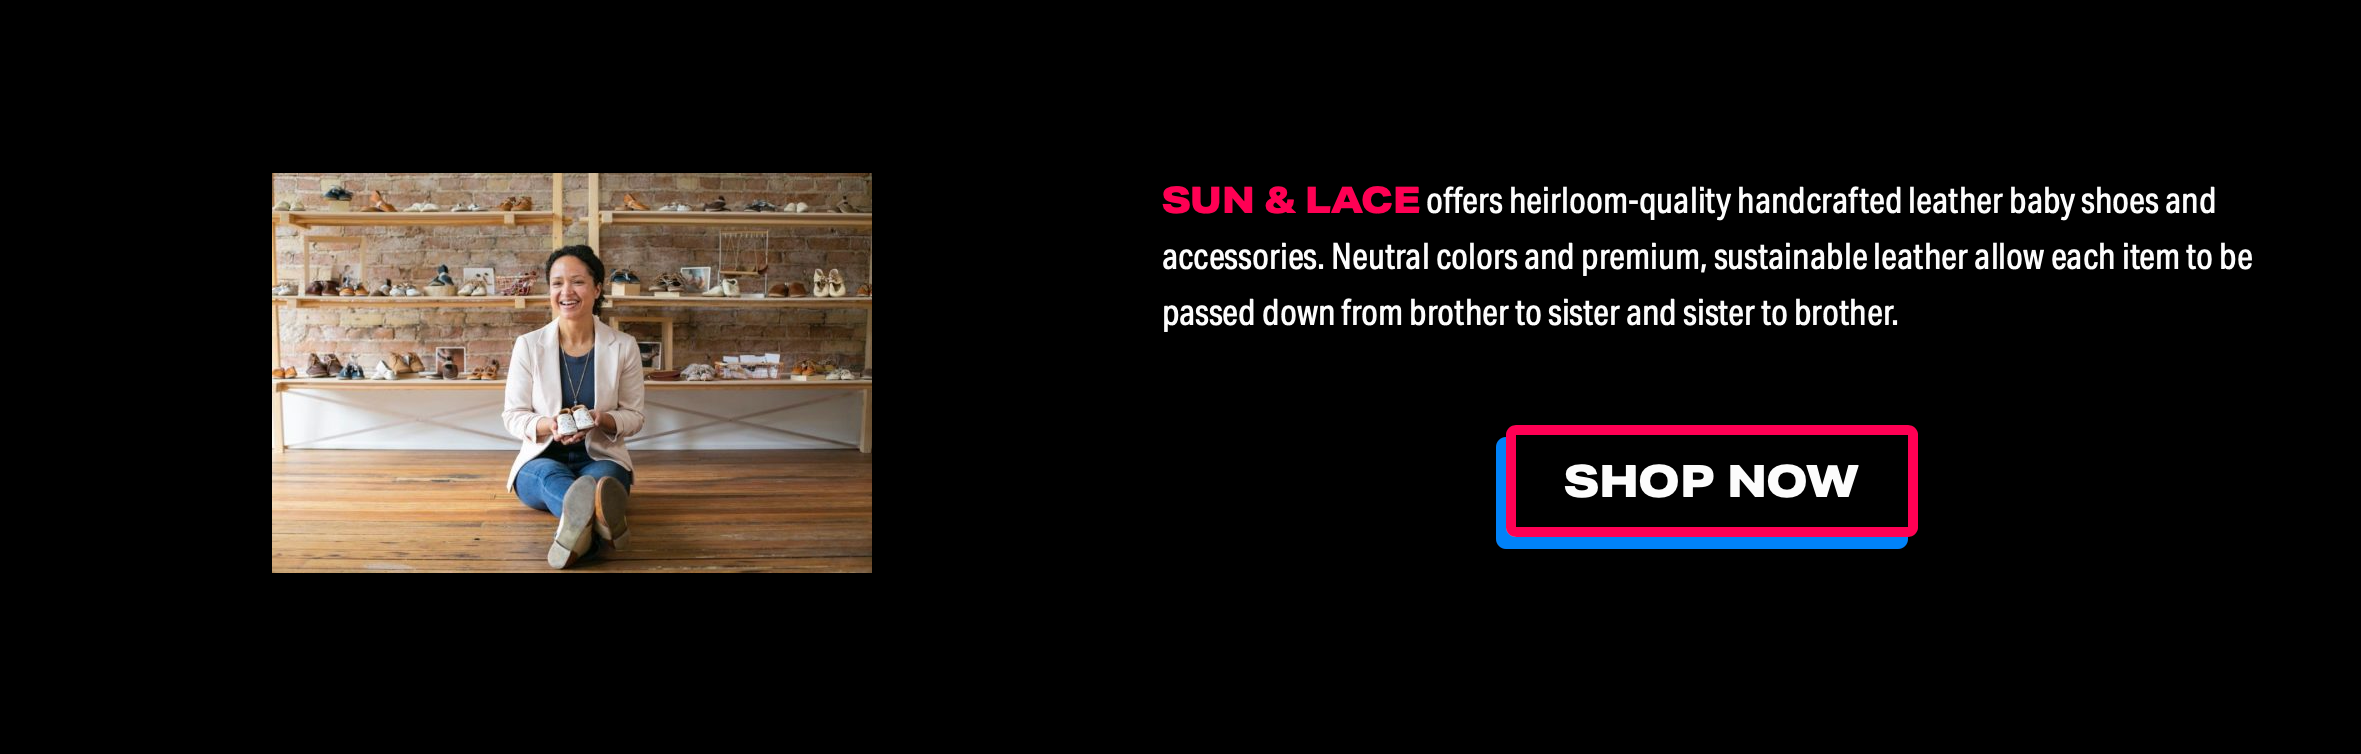 Sun & Lace on Black Entrepreneurs Day site. Black box with shop description and image of founder.